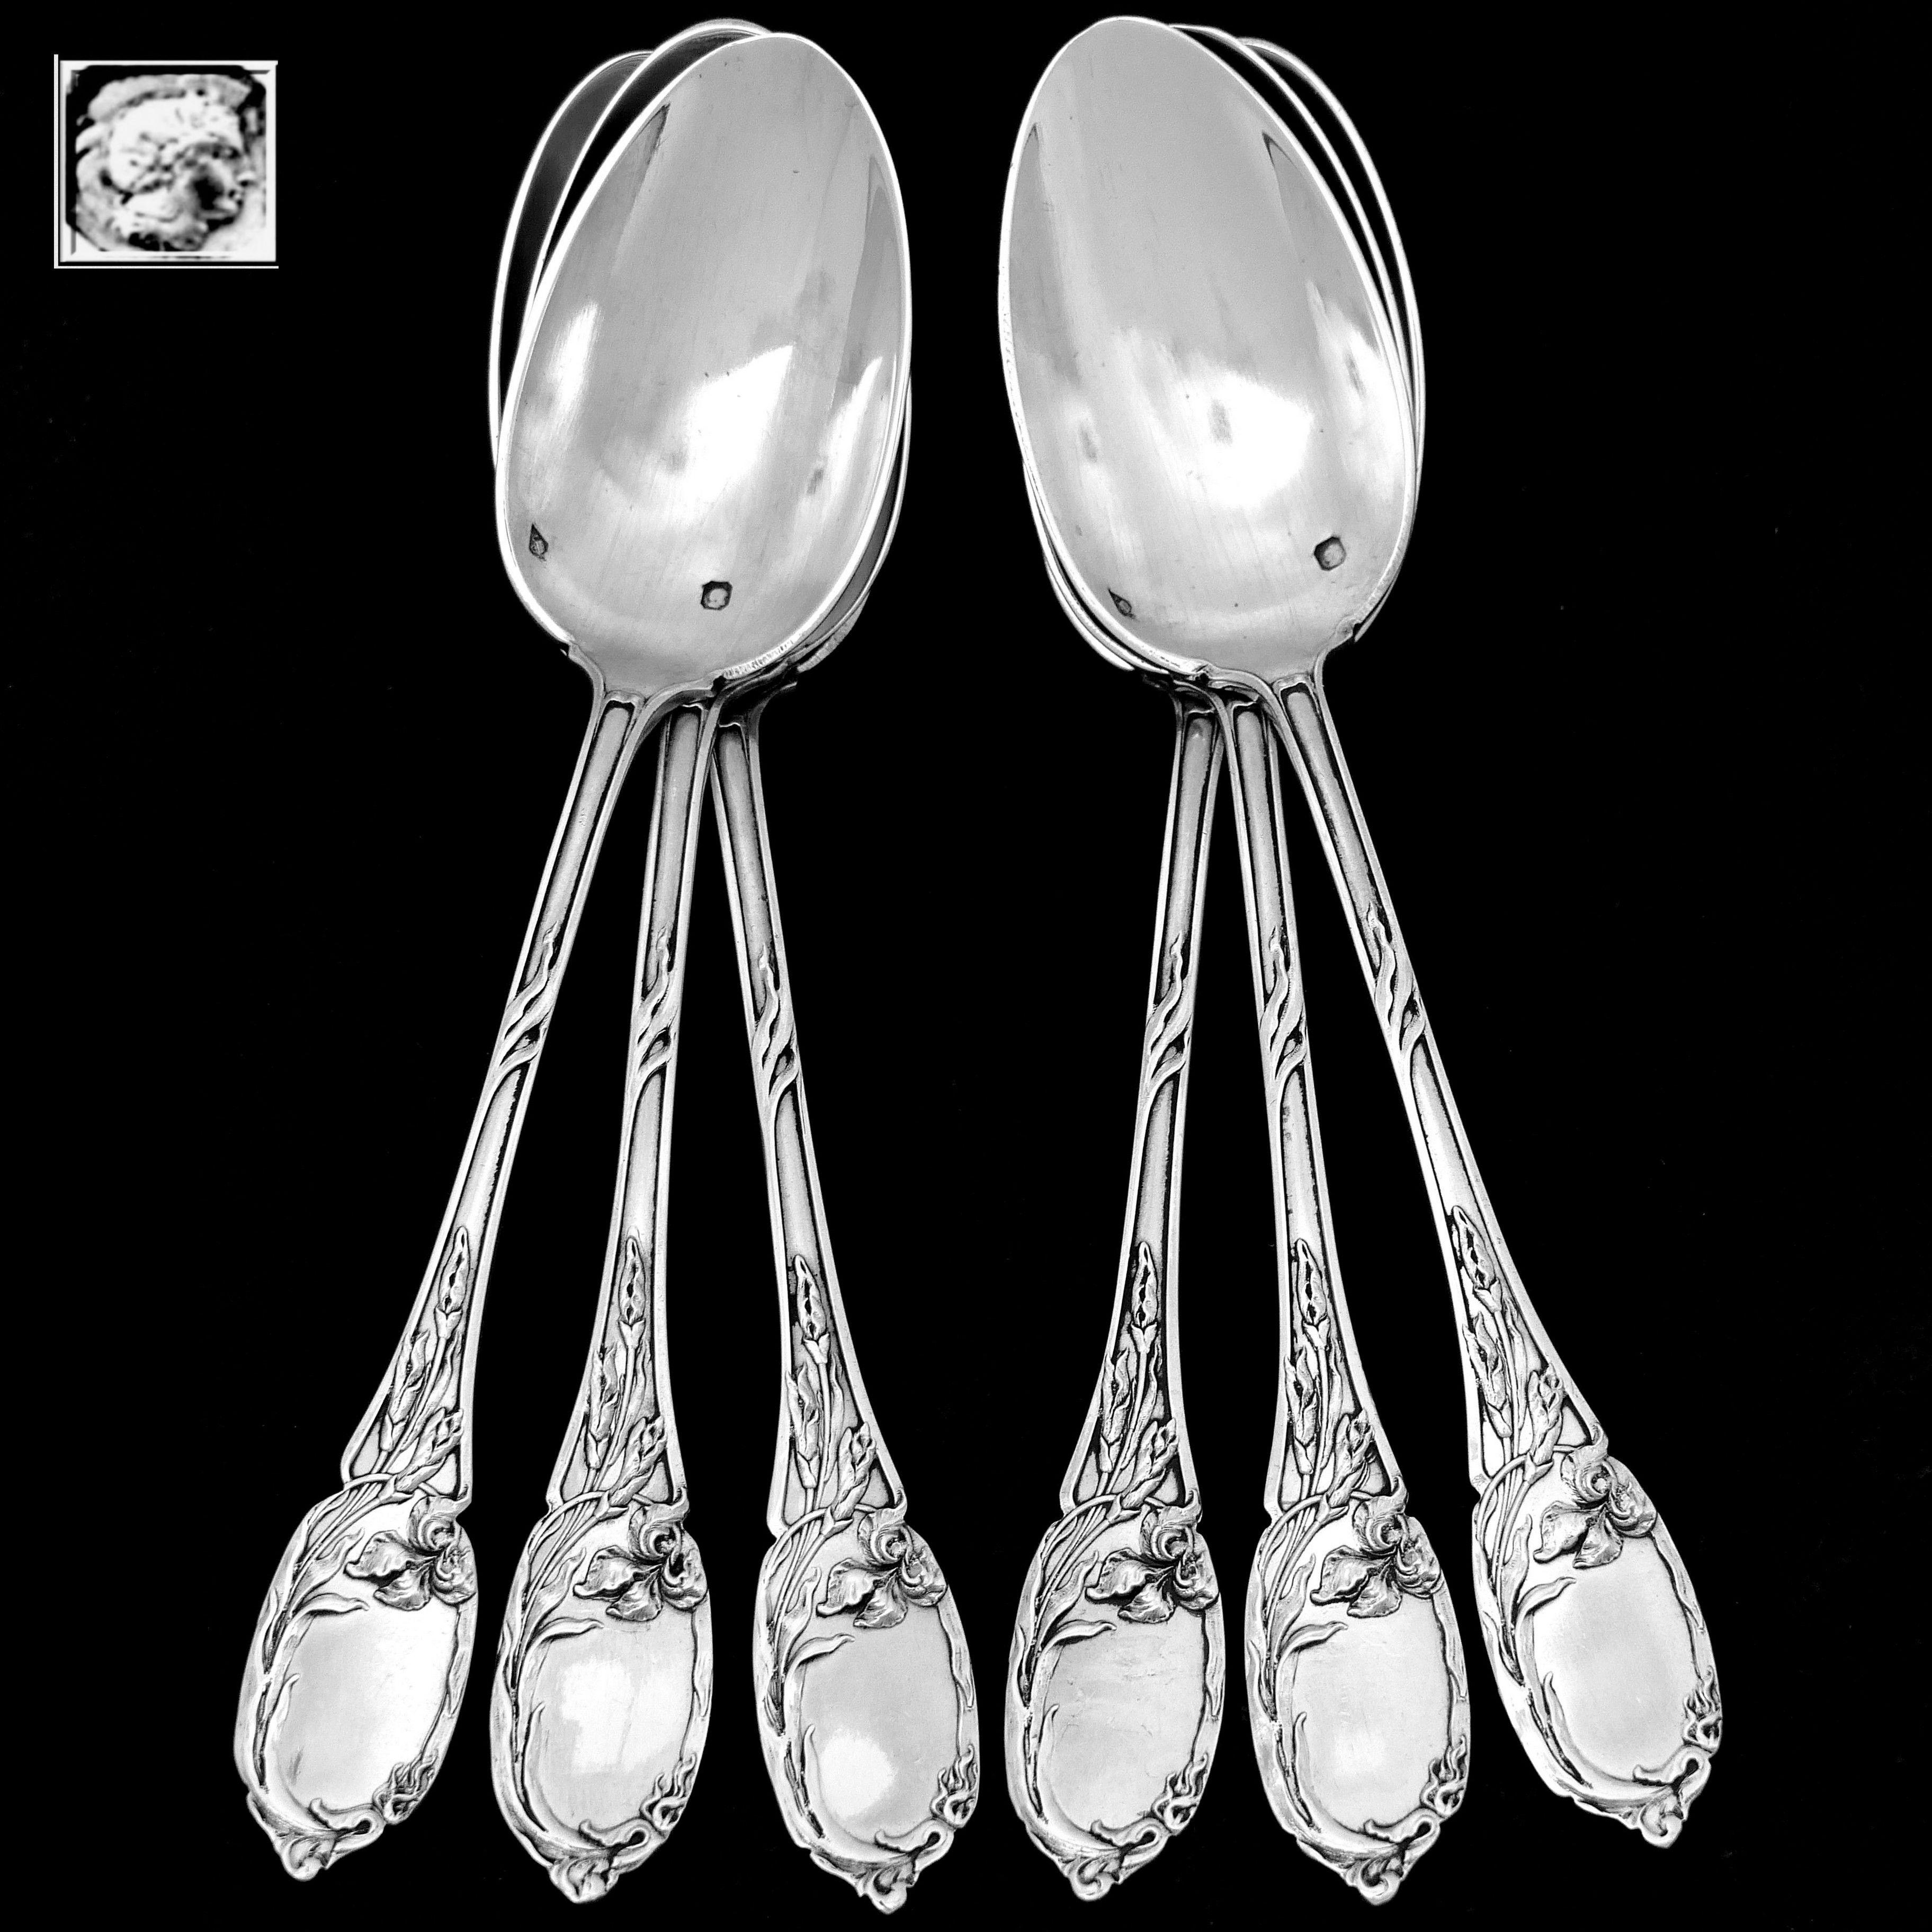 Tirbour Rare French Sterling Silver Dessert Coffee Spoons Set 6 Pc, Iris 1